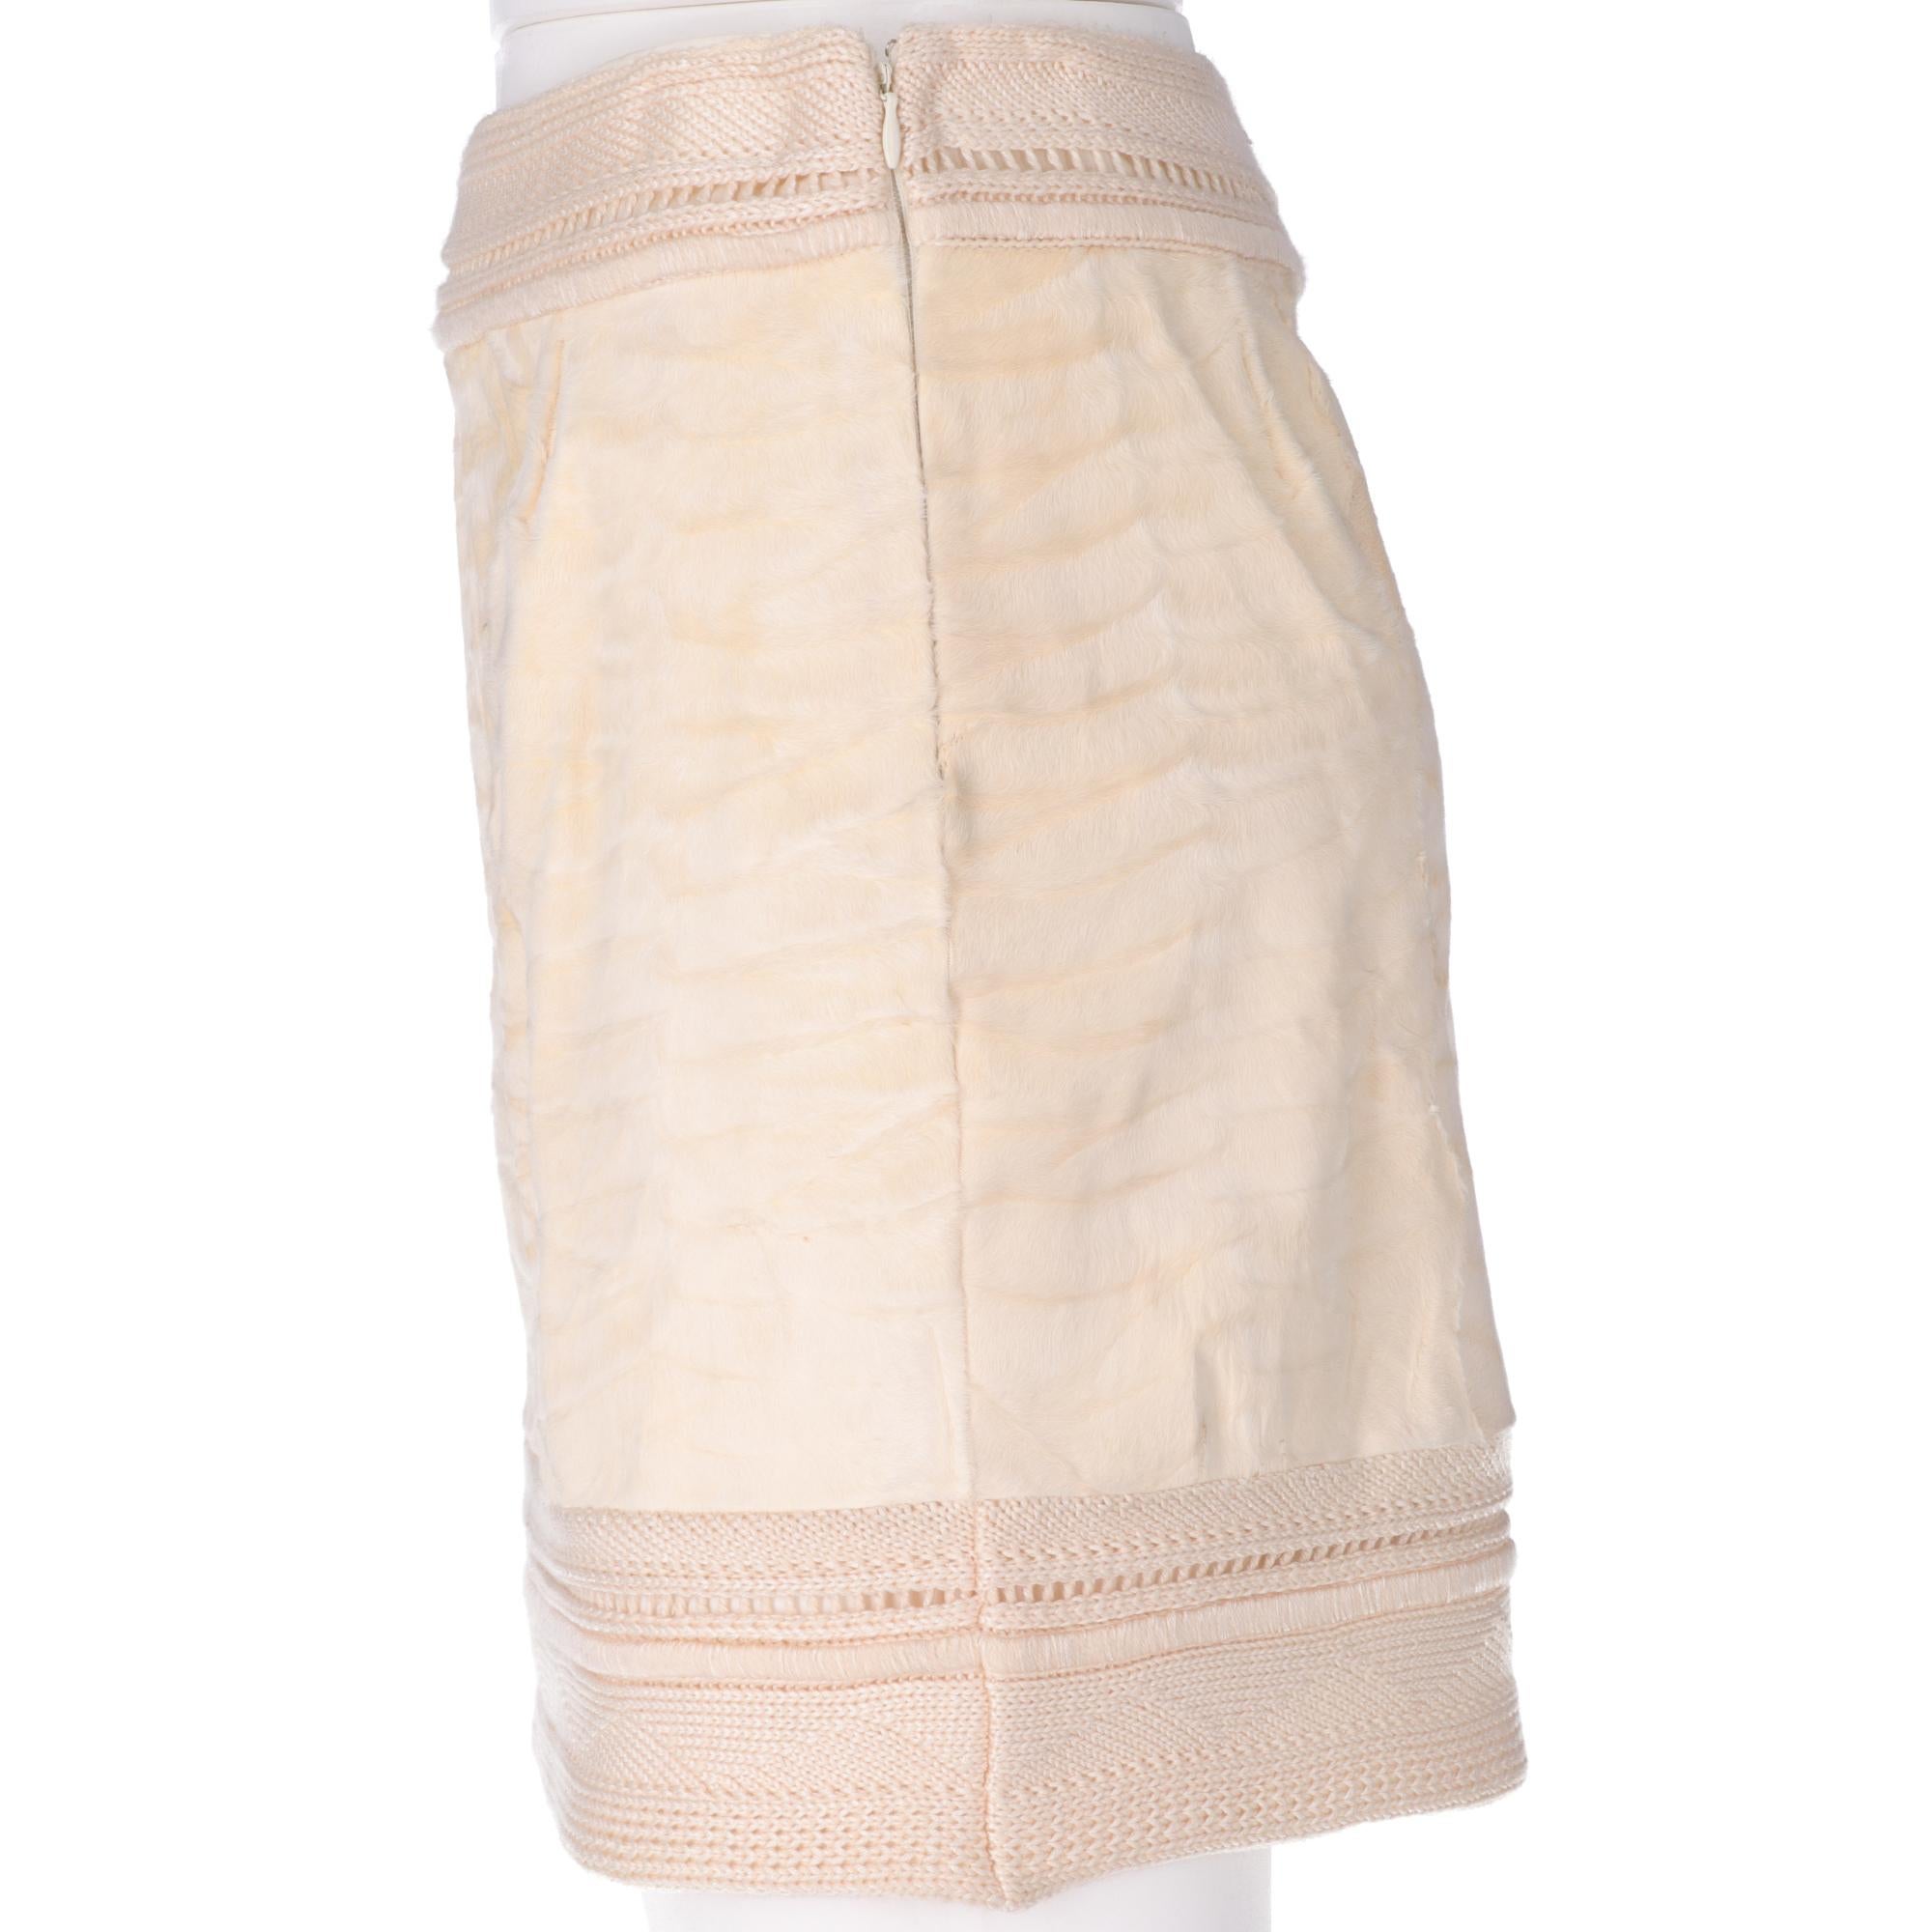 Gianfranco Ferrè high-waisted mini ivory skirt, in astrakhan fur with knitted waist and bottom band, side closure with invisible zip and hook. Lined interior. 

This item belongs to an original vintage stock: it has never been worn and comes with